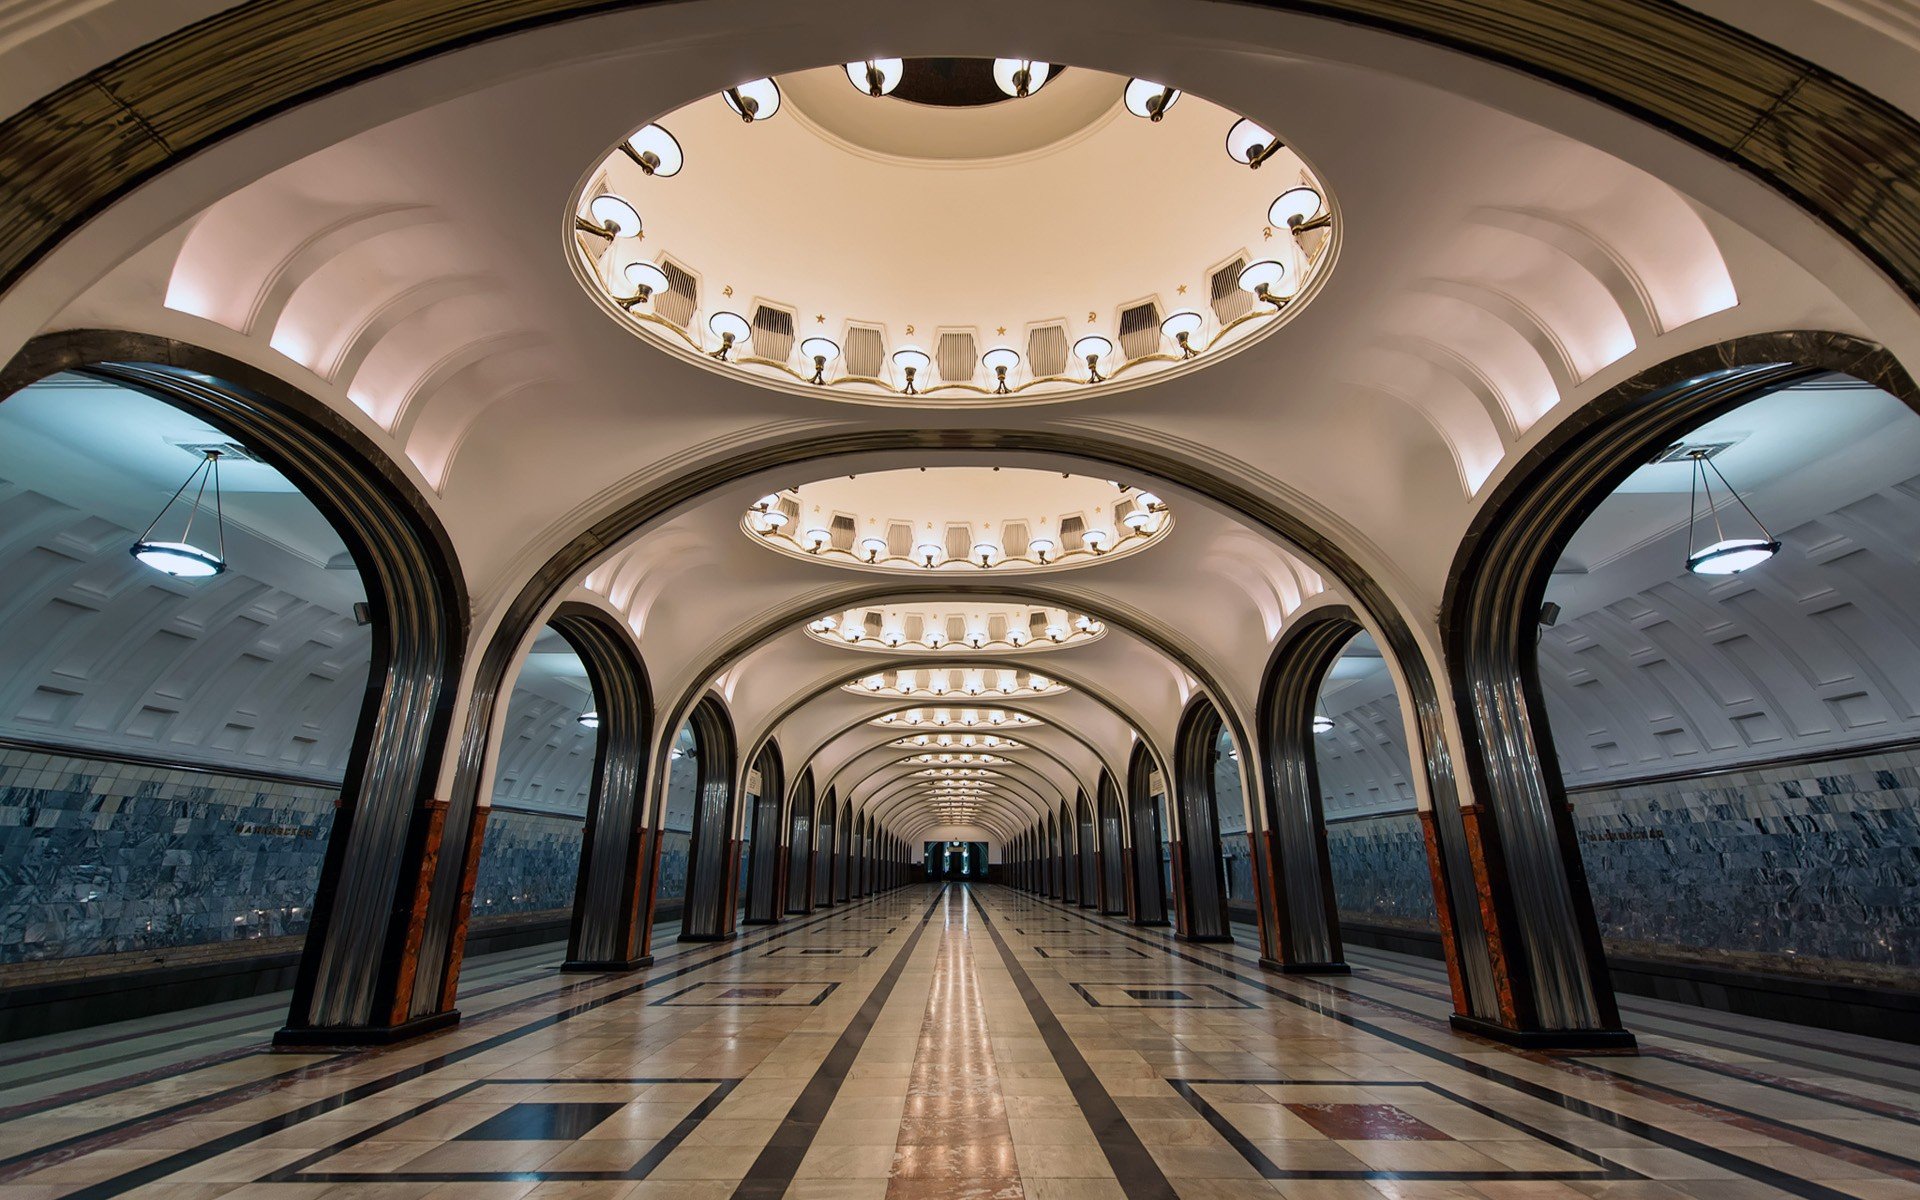 architecture, Russia, Metro, Train station, Arch, Tiles, Lights, Symmetry, Circle, Moscow Wallpaper